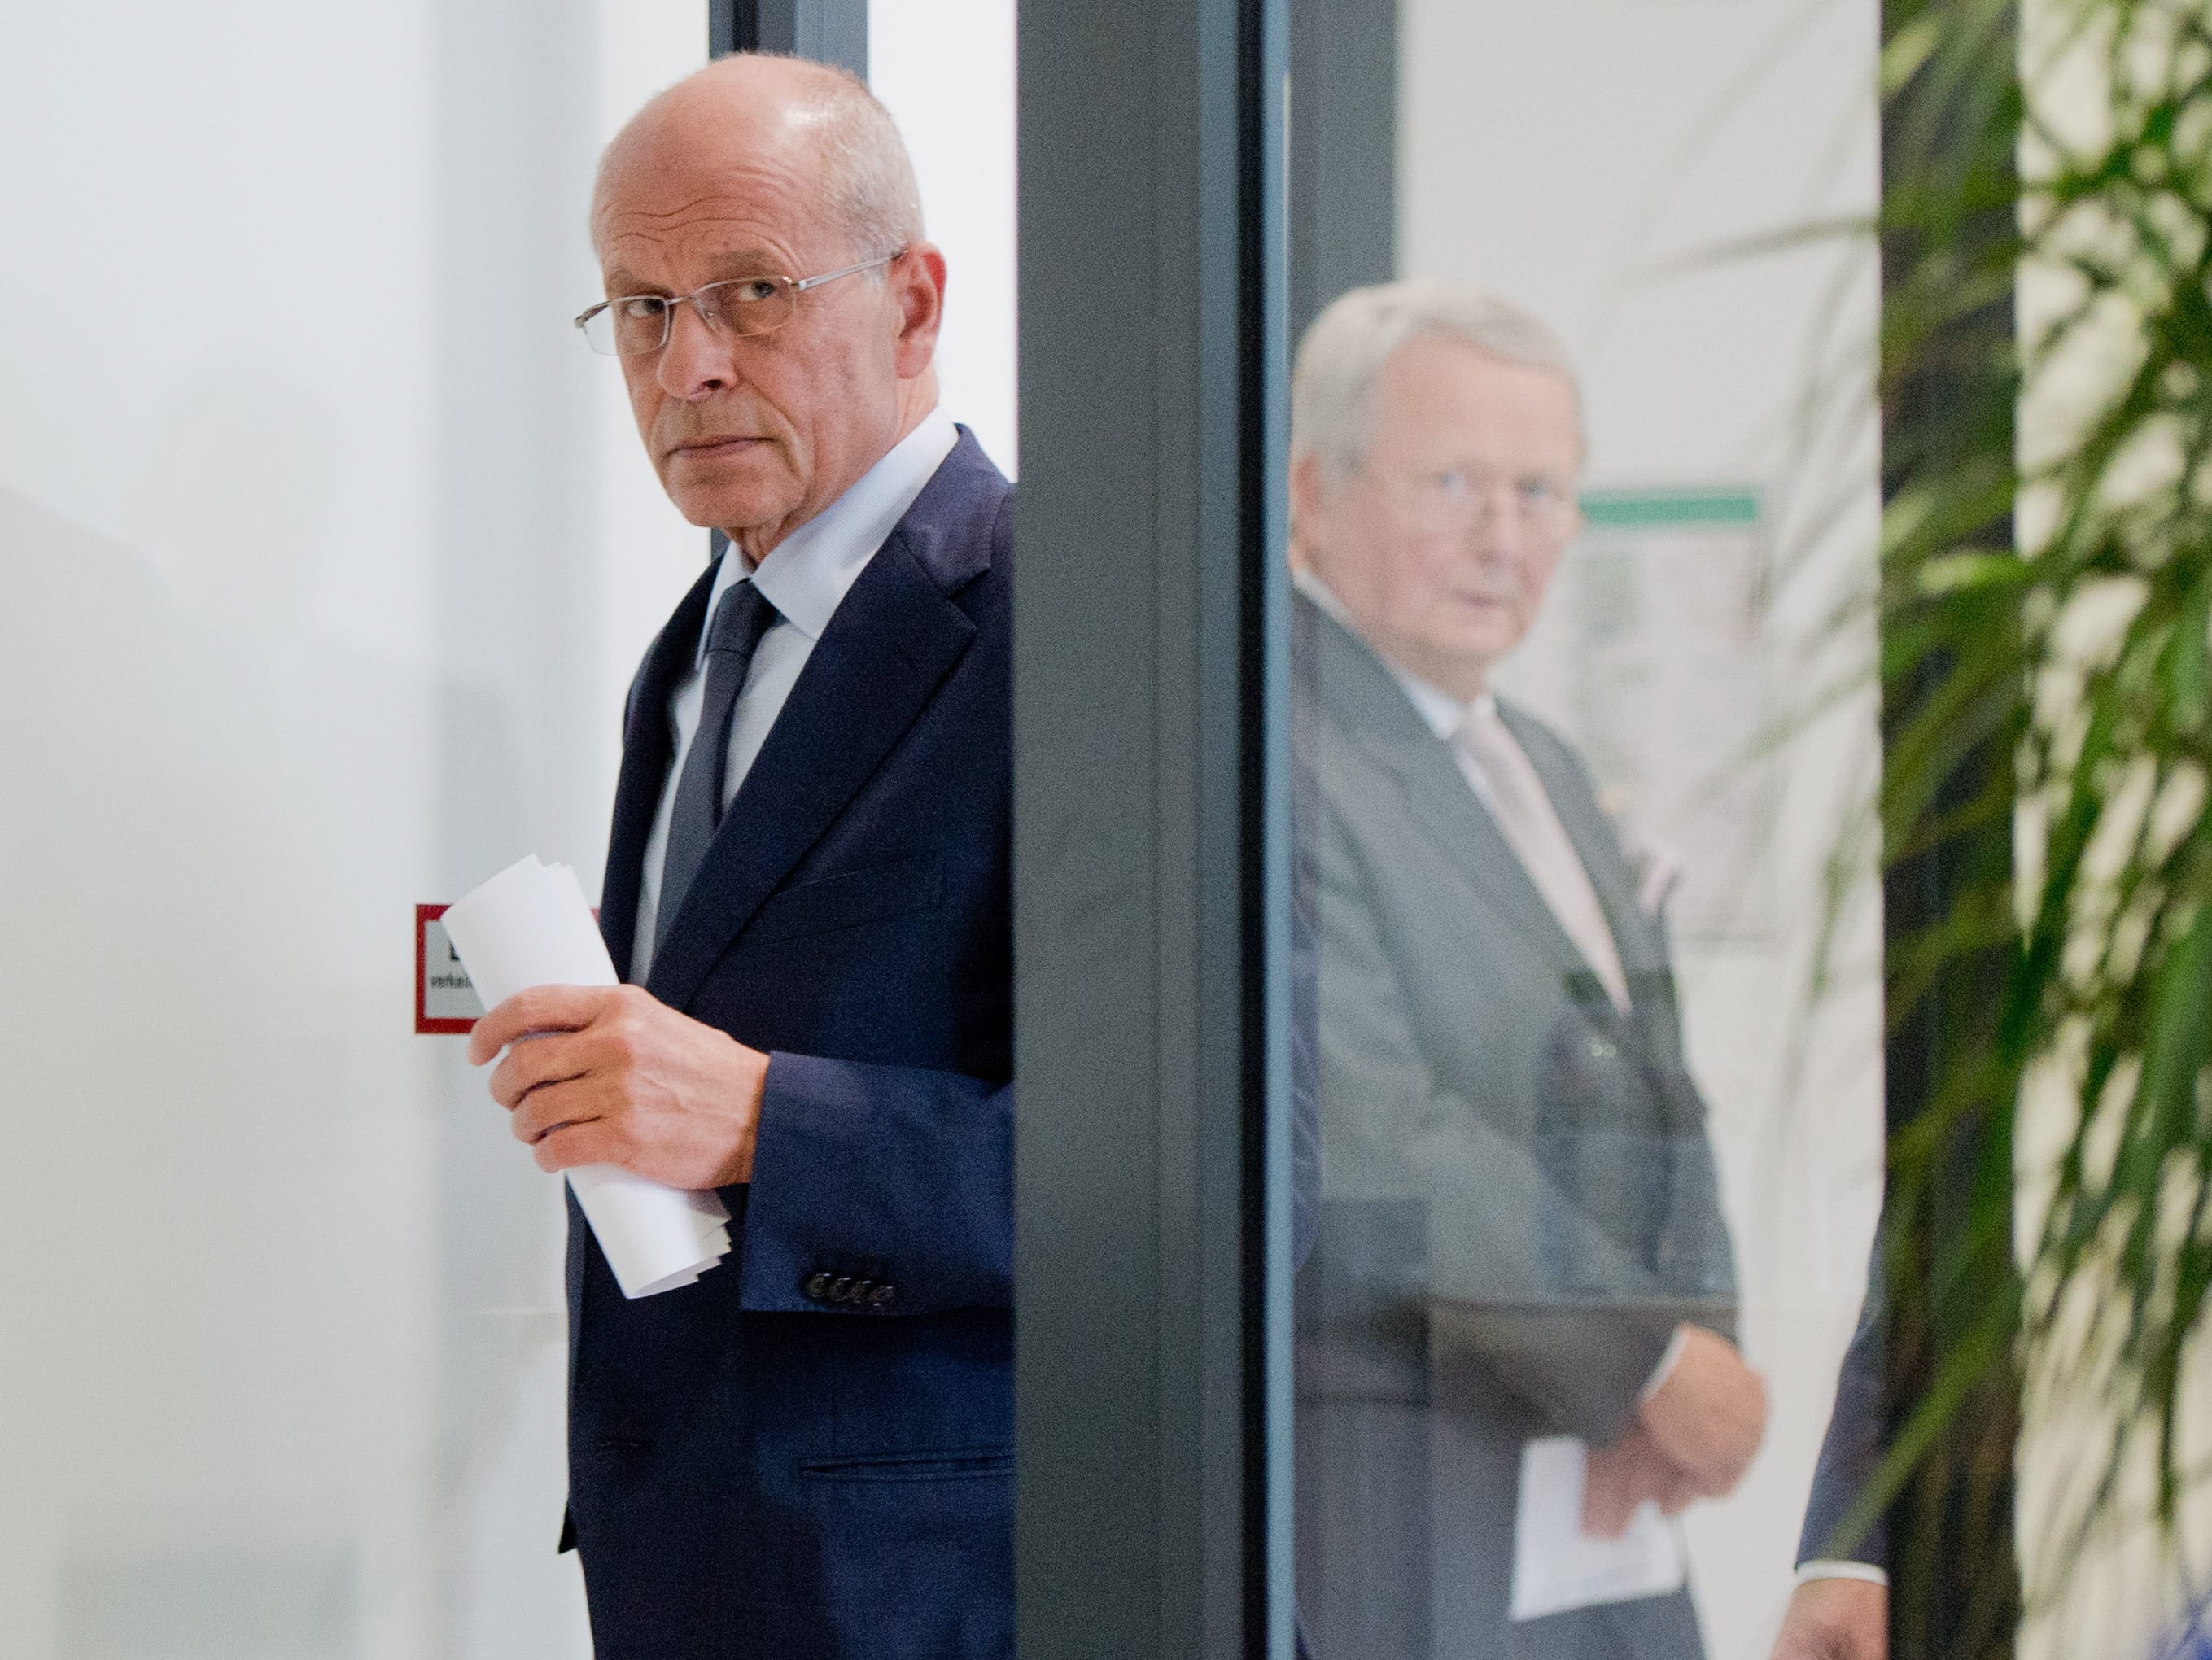 Berthold Huber, acting head of Volkswagen's supervisory board, left, and supervisory board member Wolfgang Porsche, right,  arrive for a statement announcing that CEO Martin Winterkorn stepped down amid an emissions scandal in the company's headquarters in Wolfsburg, Germany, on Wednesday.